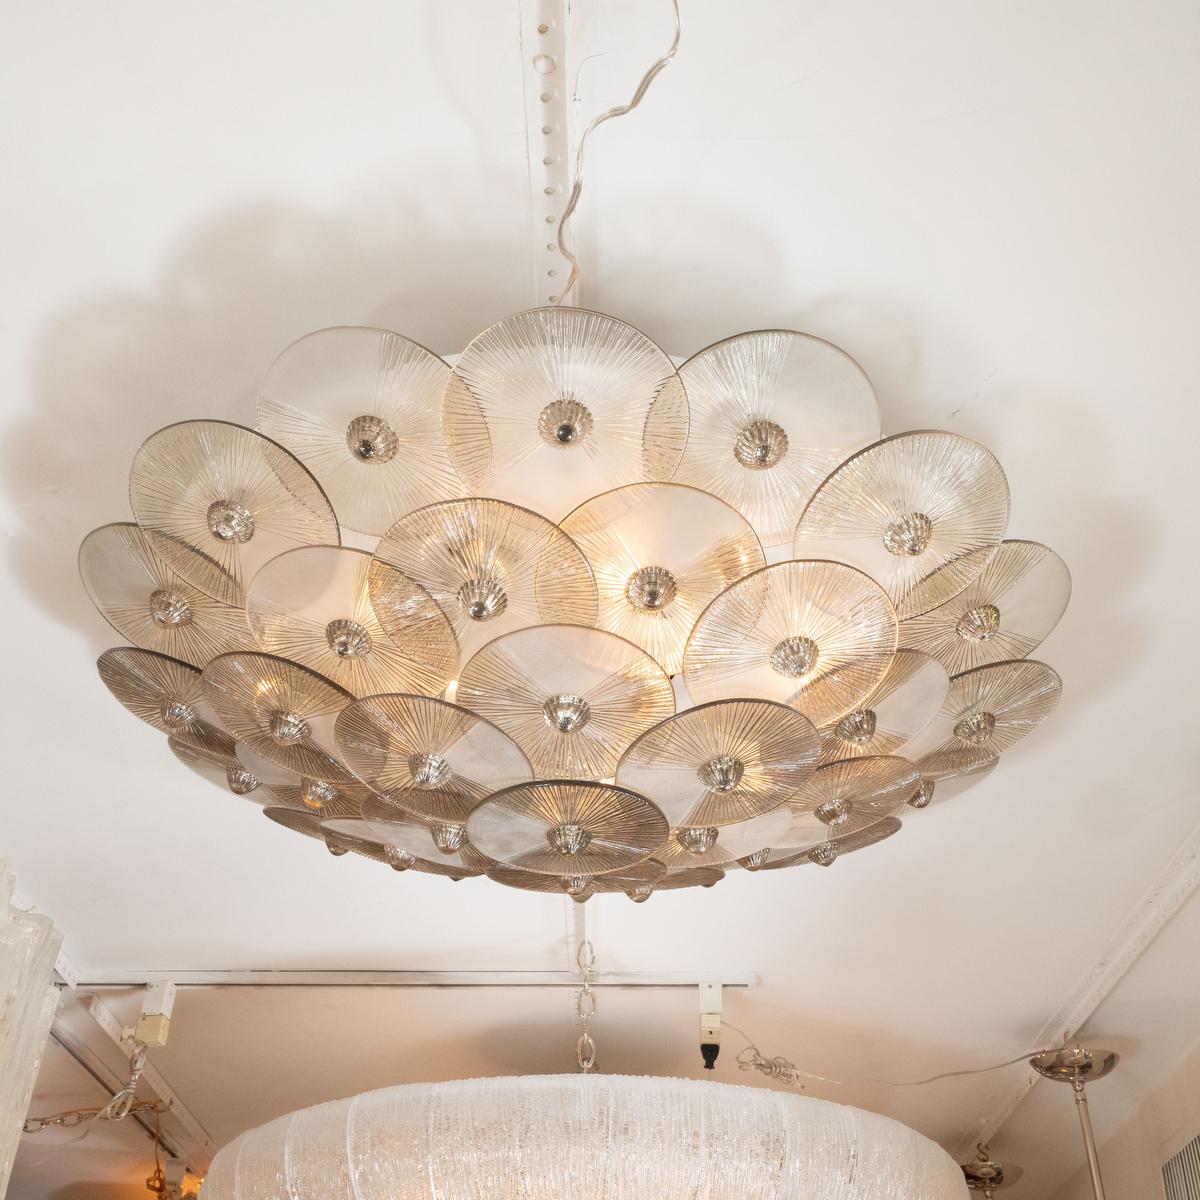 Circular flush mount ceiling fixture composed of smoked glass textured disk shades.